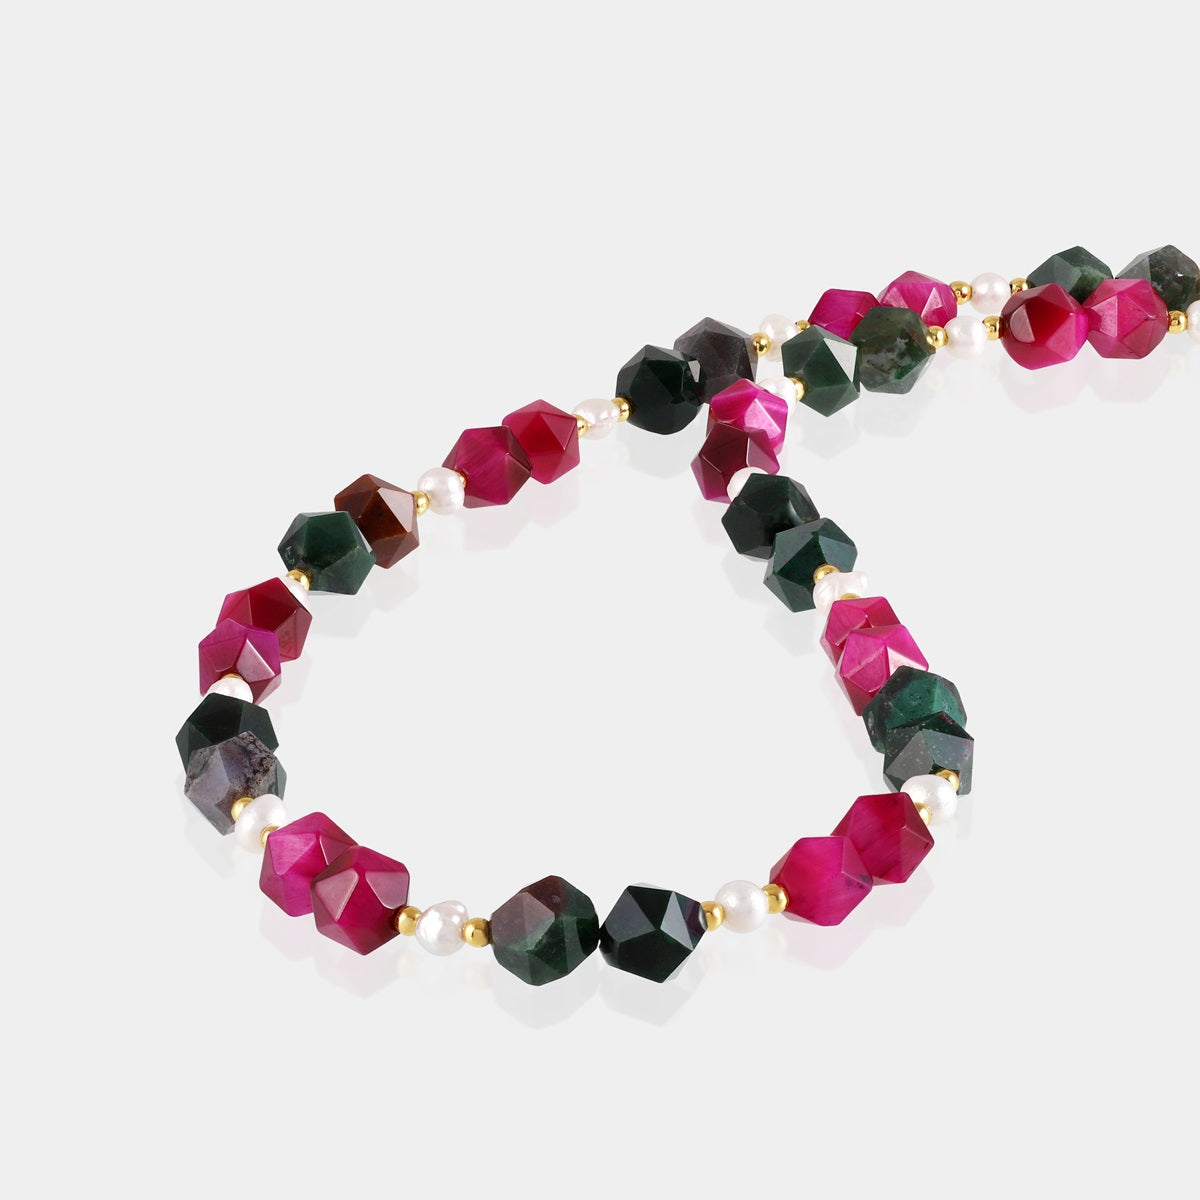 Close-up of Bloodstone and Pink Tiger's Eye Gemstone Beads